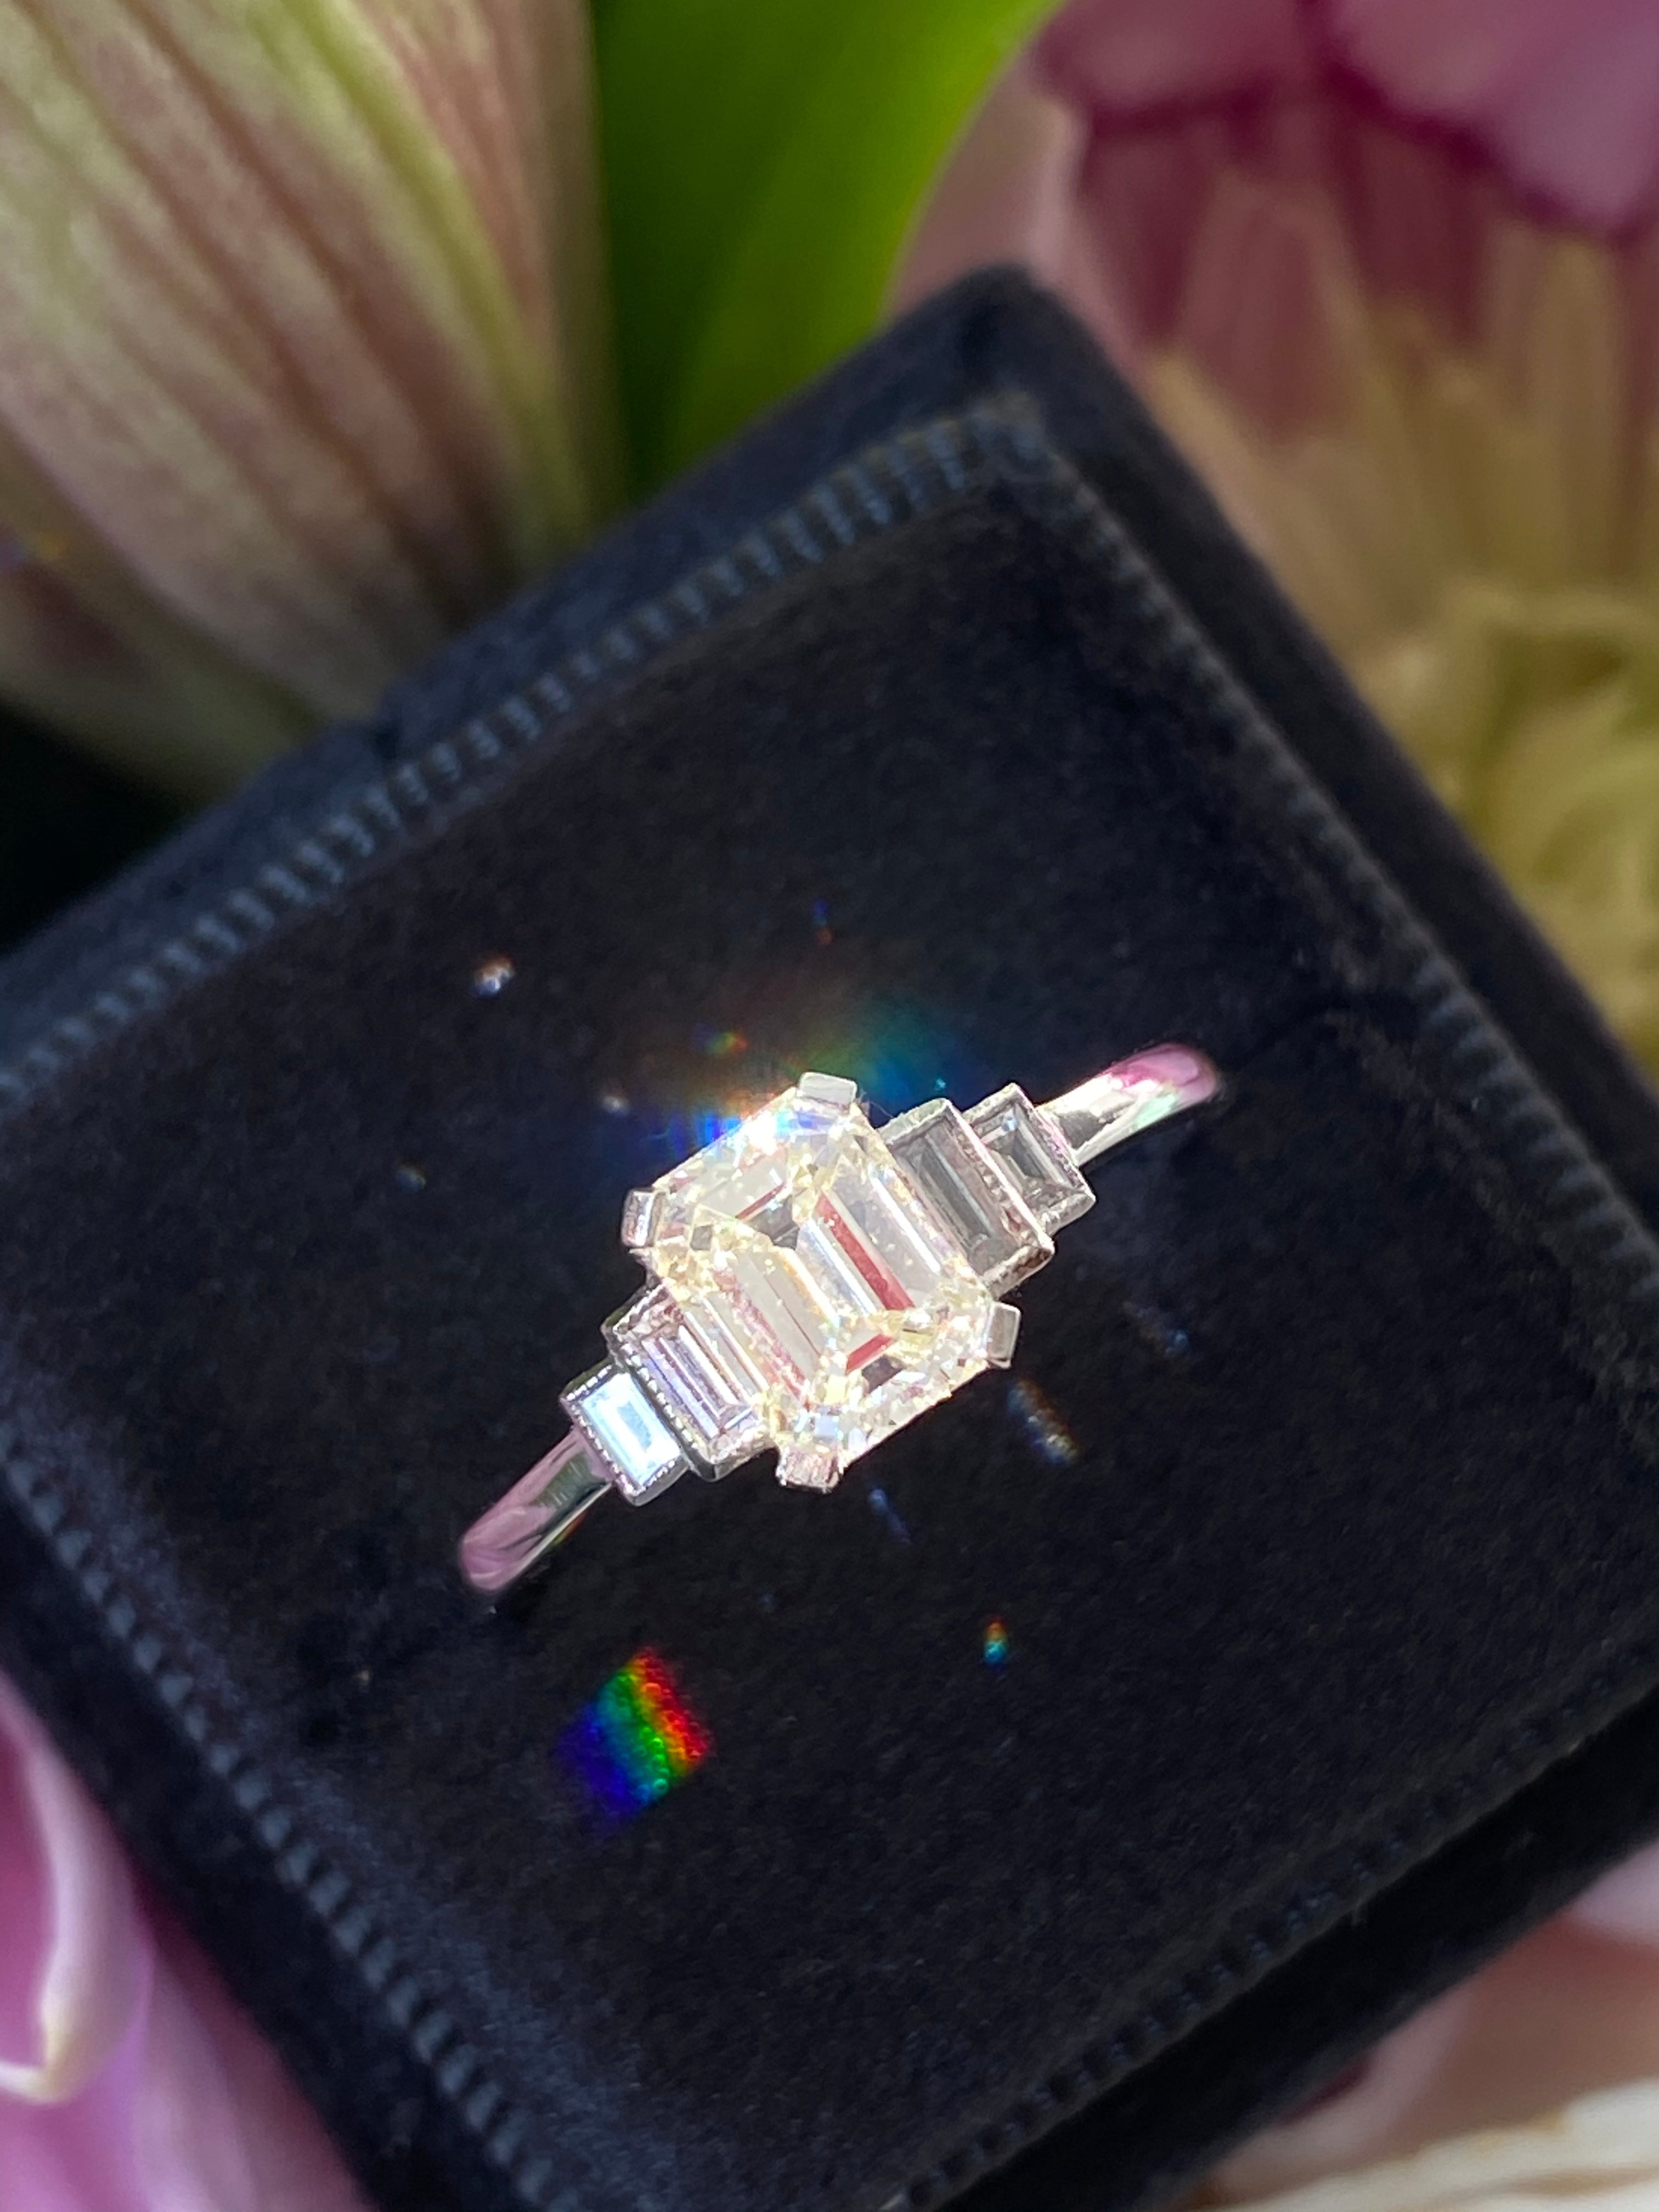 Heritage 1.15ct + Emerald Cut Lab Grown Diamond Solitaire Engagement Ring, at least F colour / VVS clarity